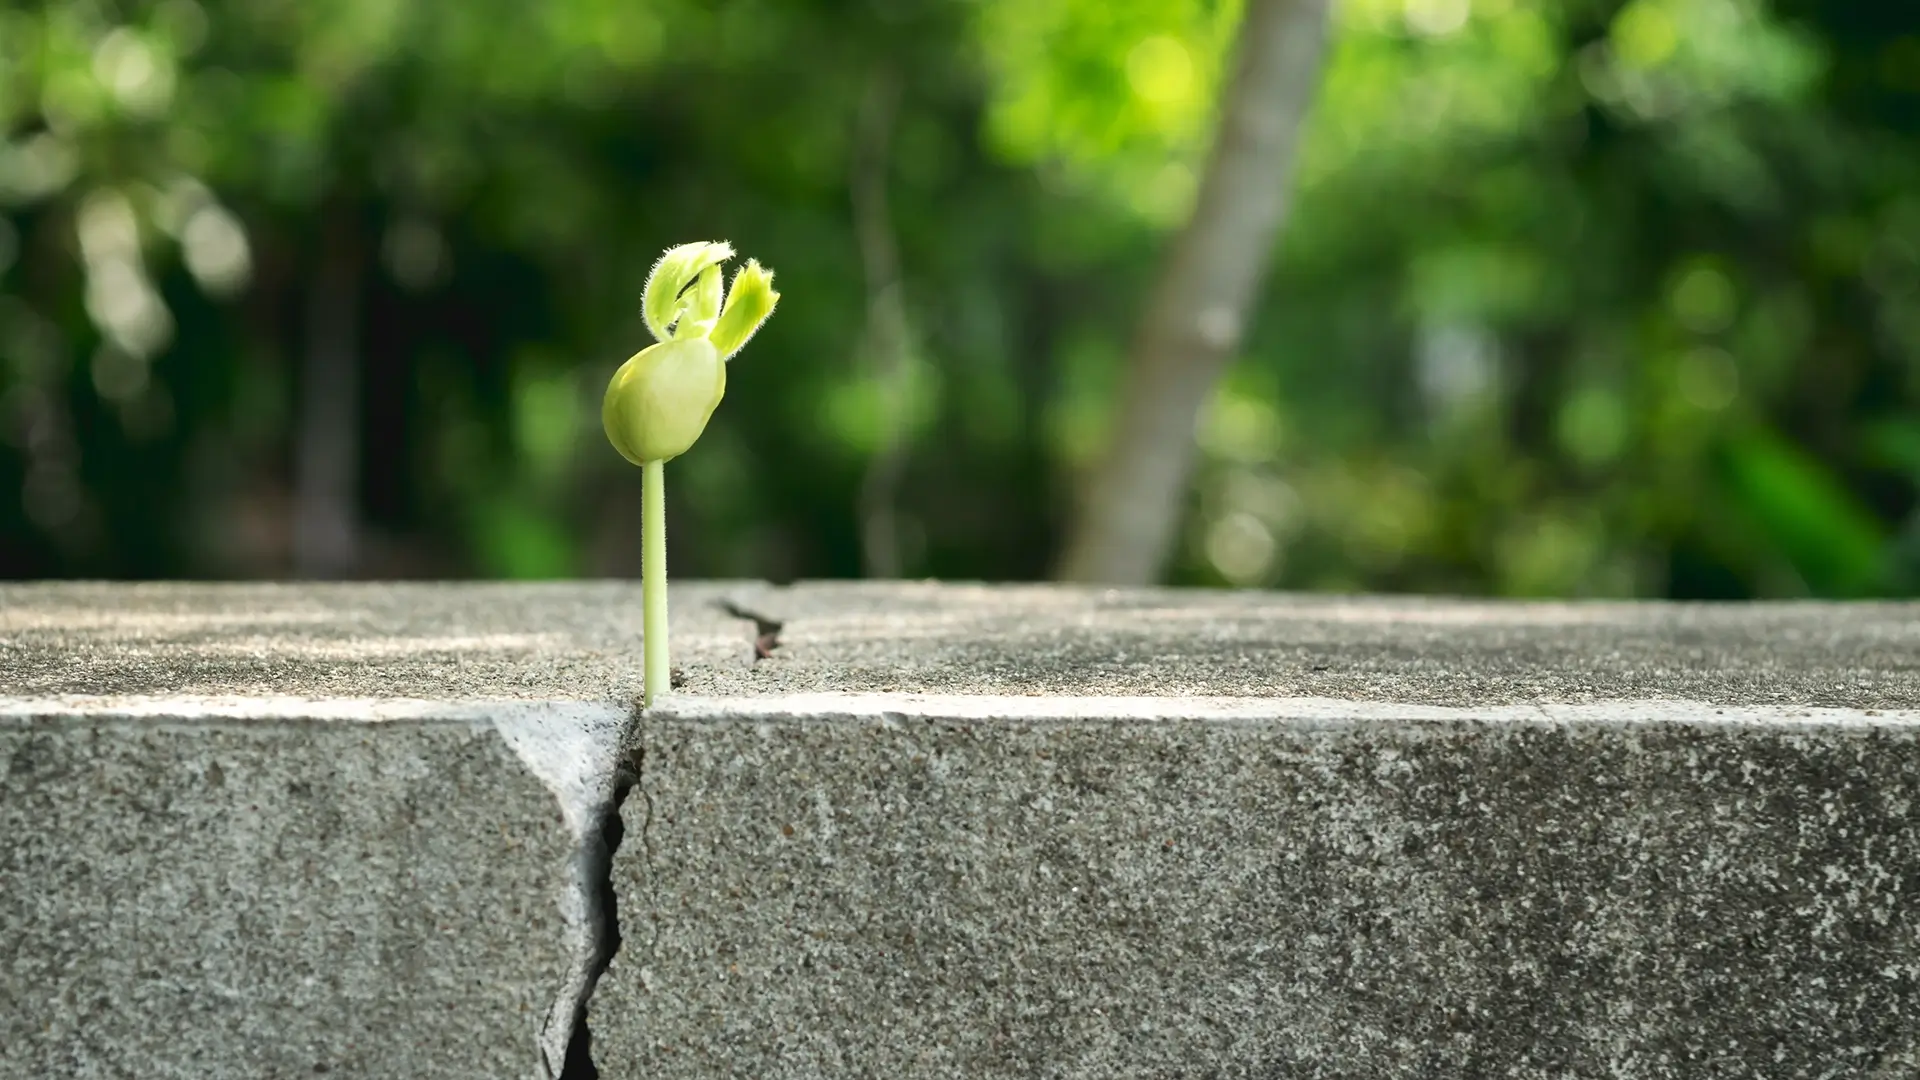 A green sprout grows out of a crack in a concrete block